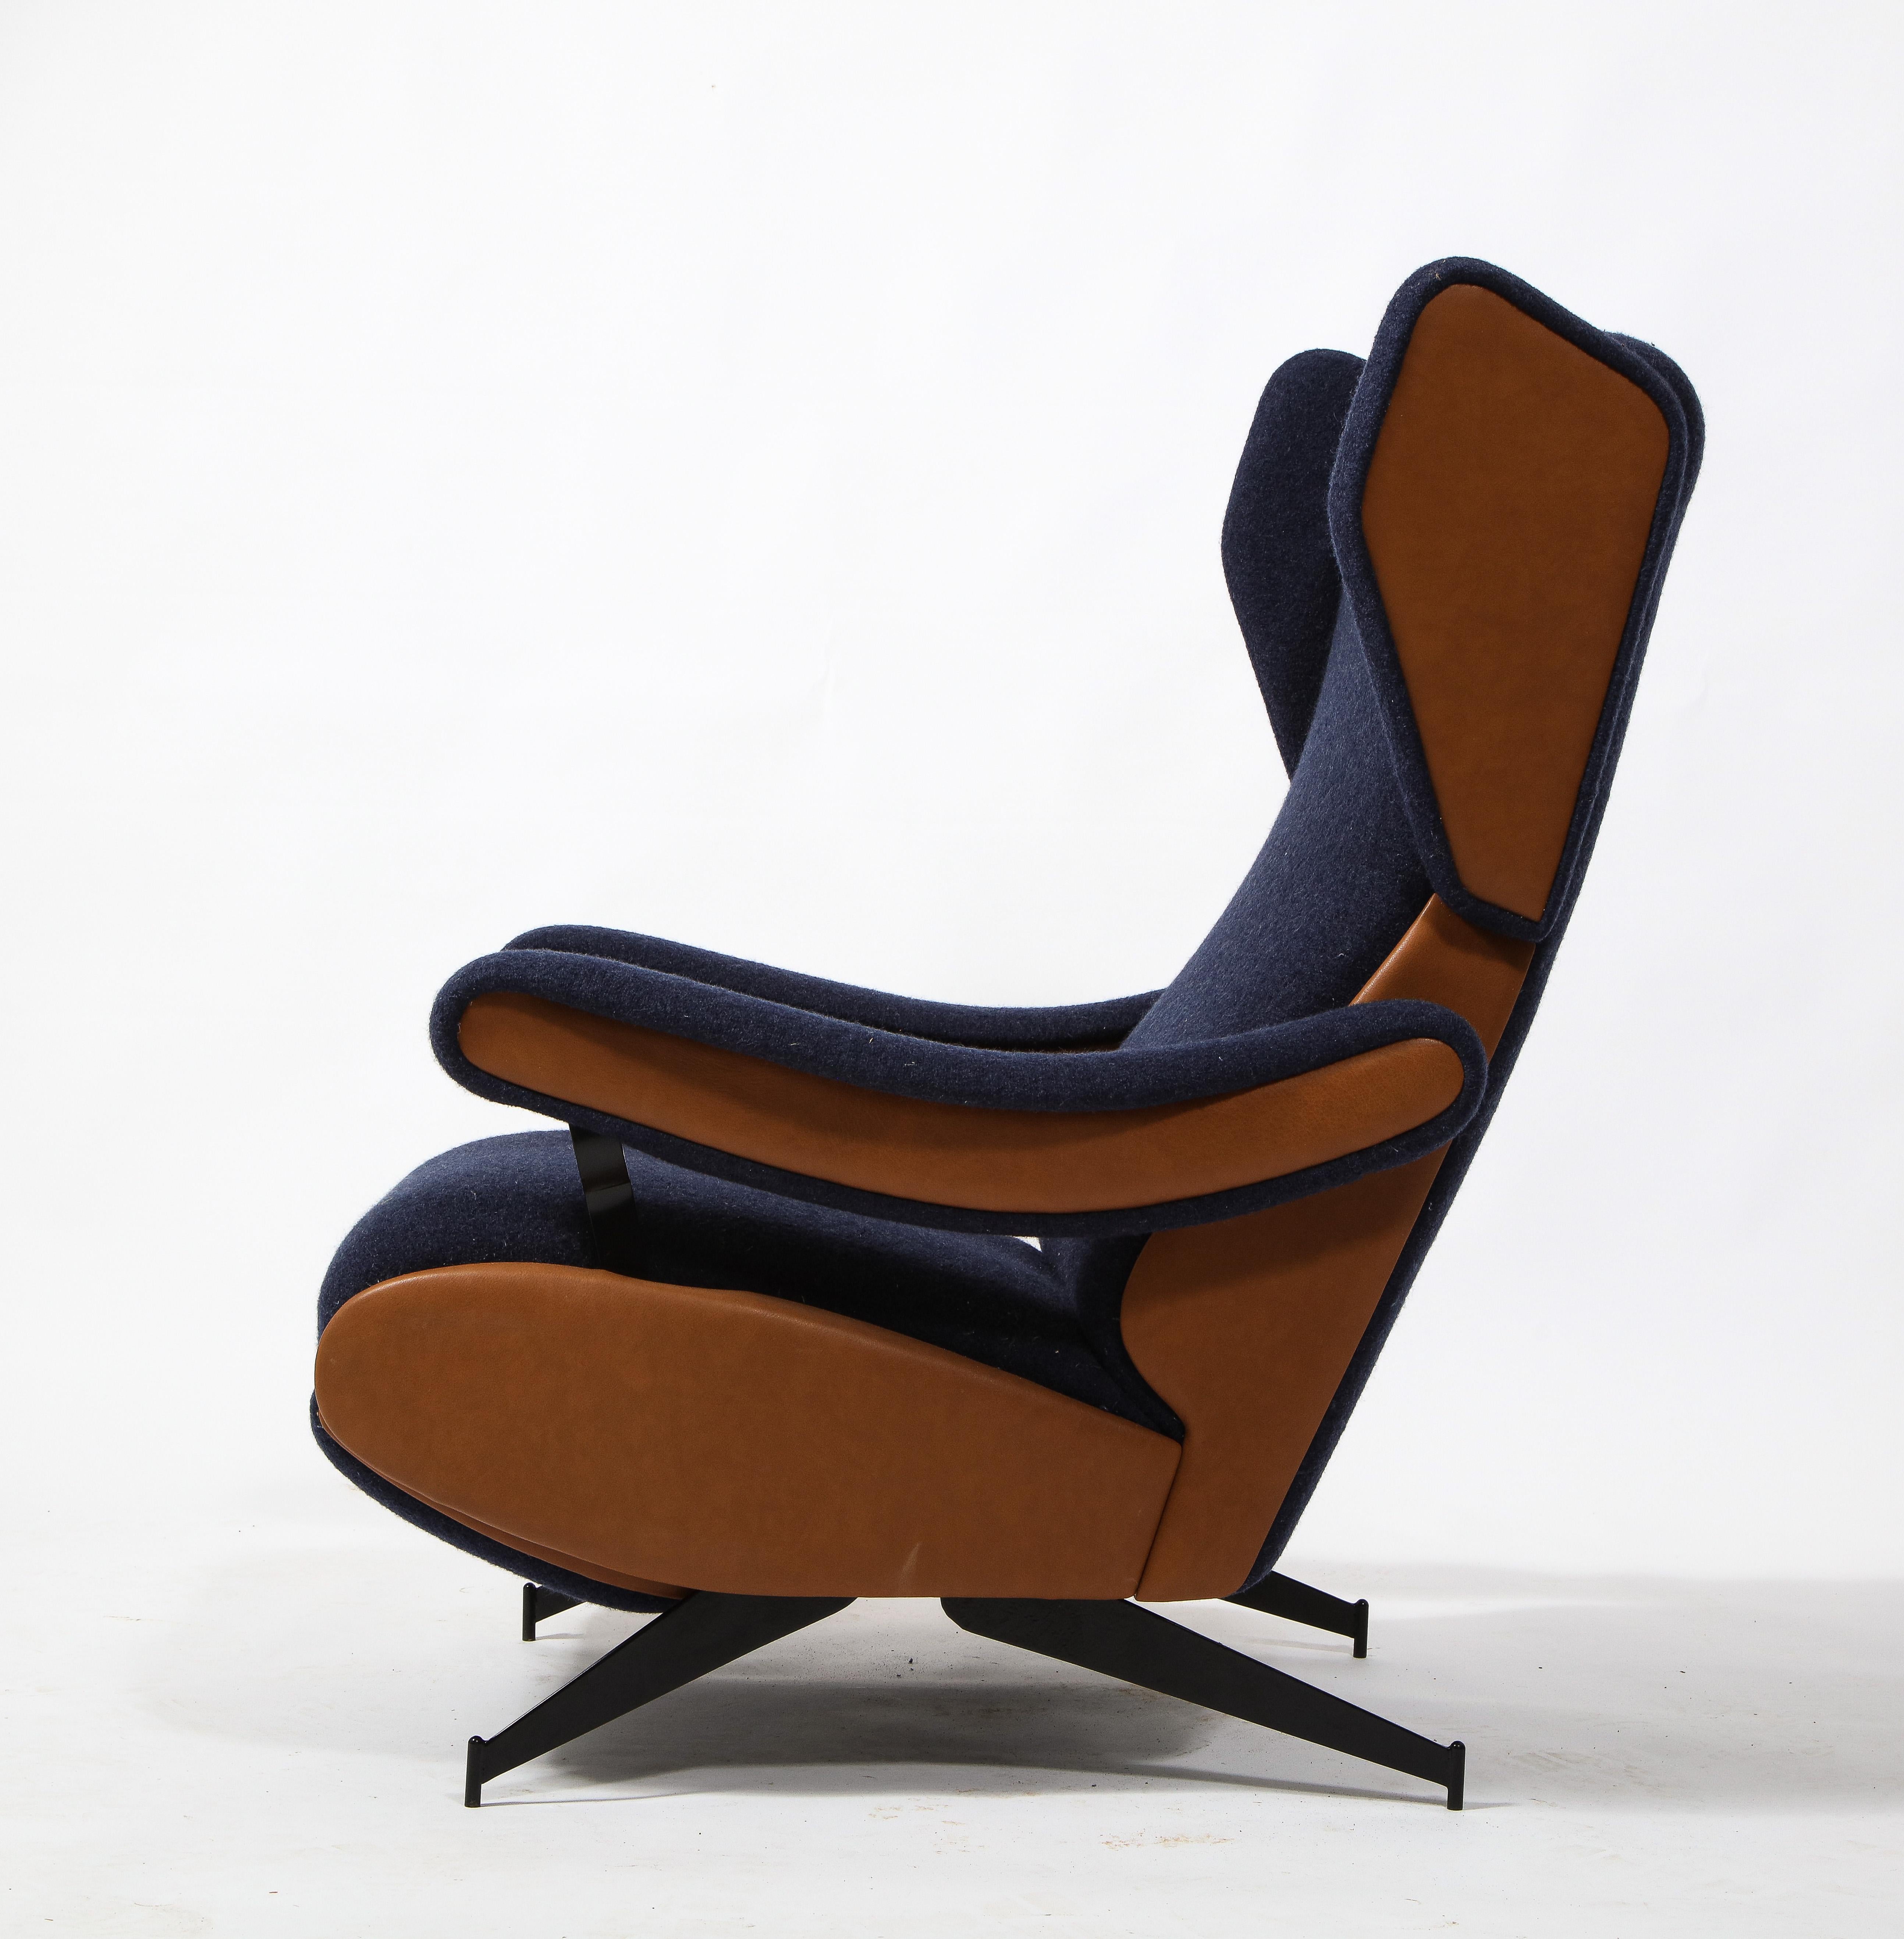 Enameled Large Reclining Lounge Chair, Italy 1960's